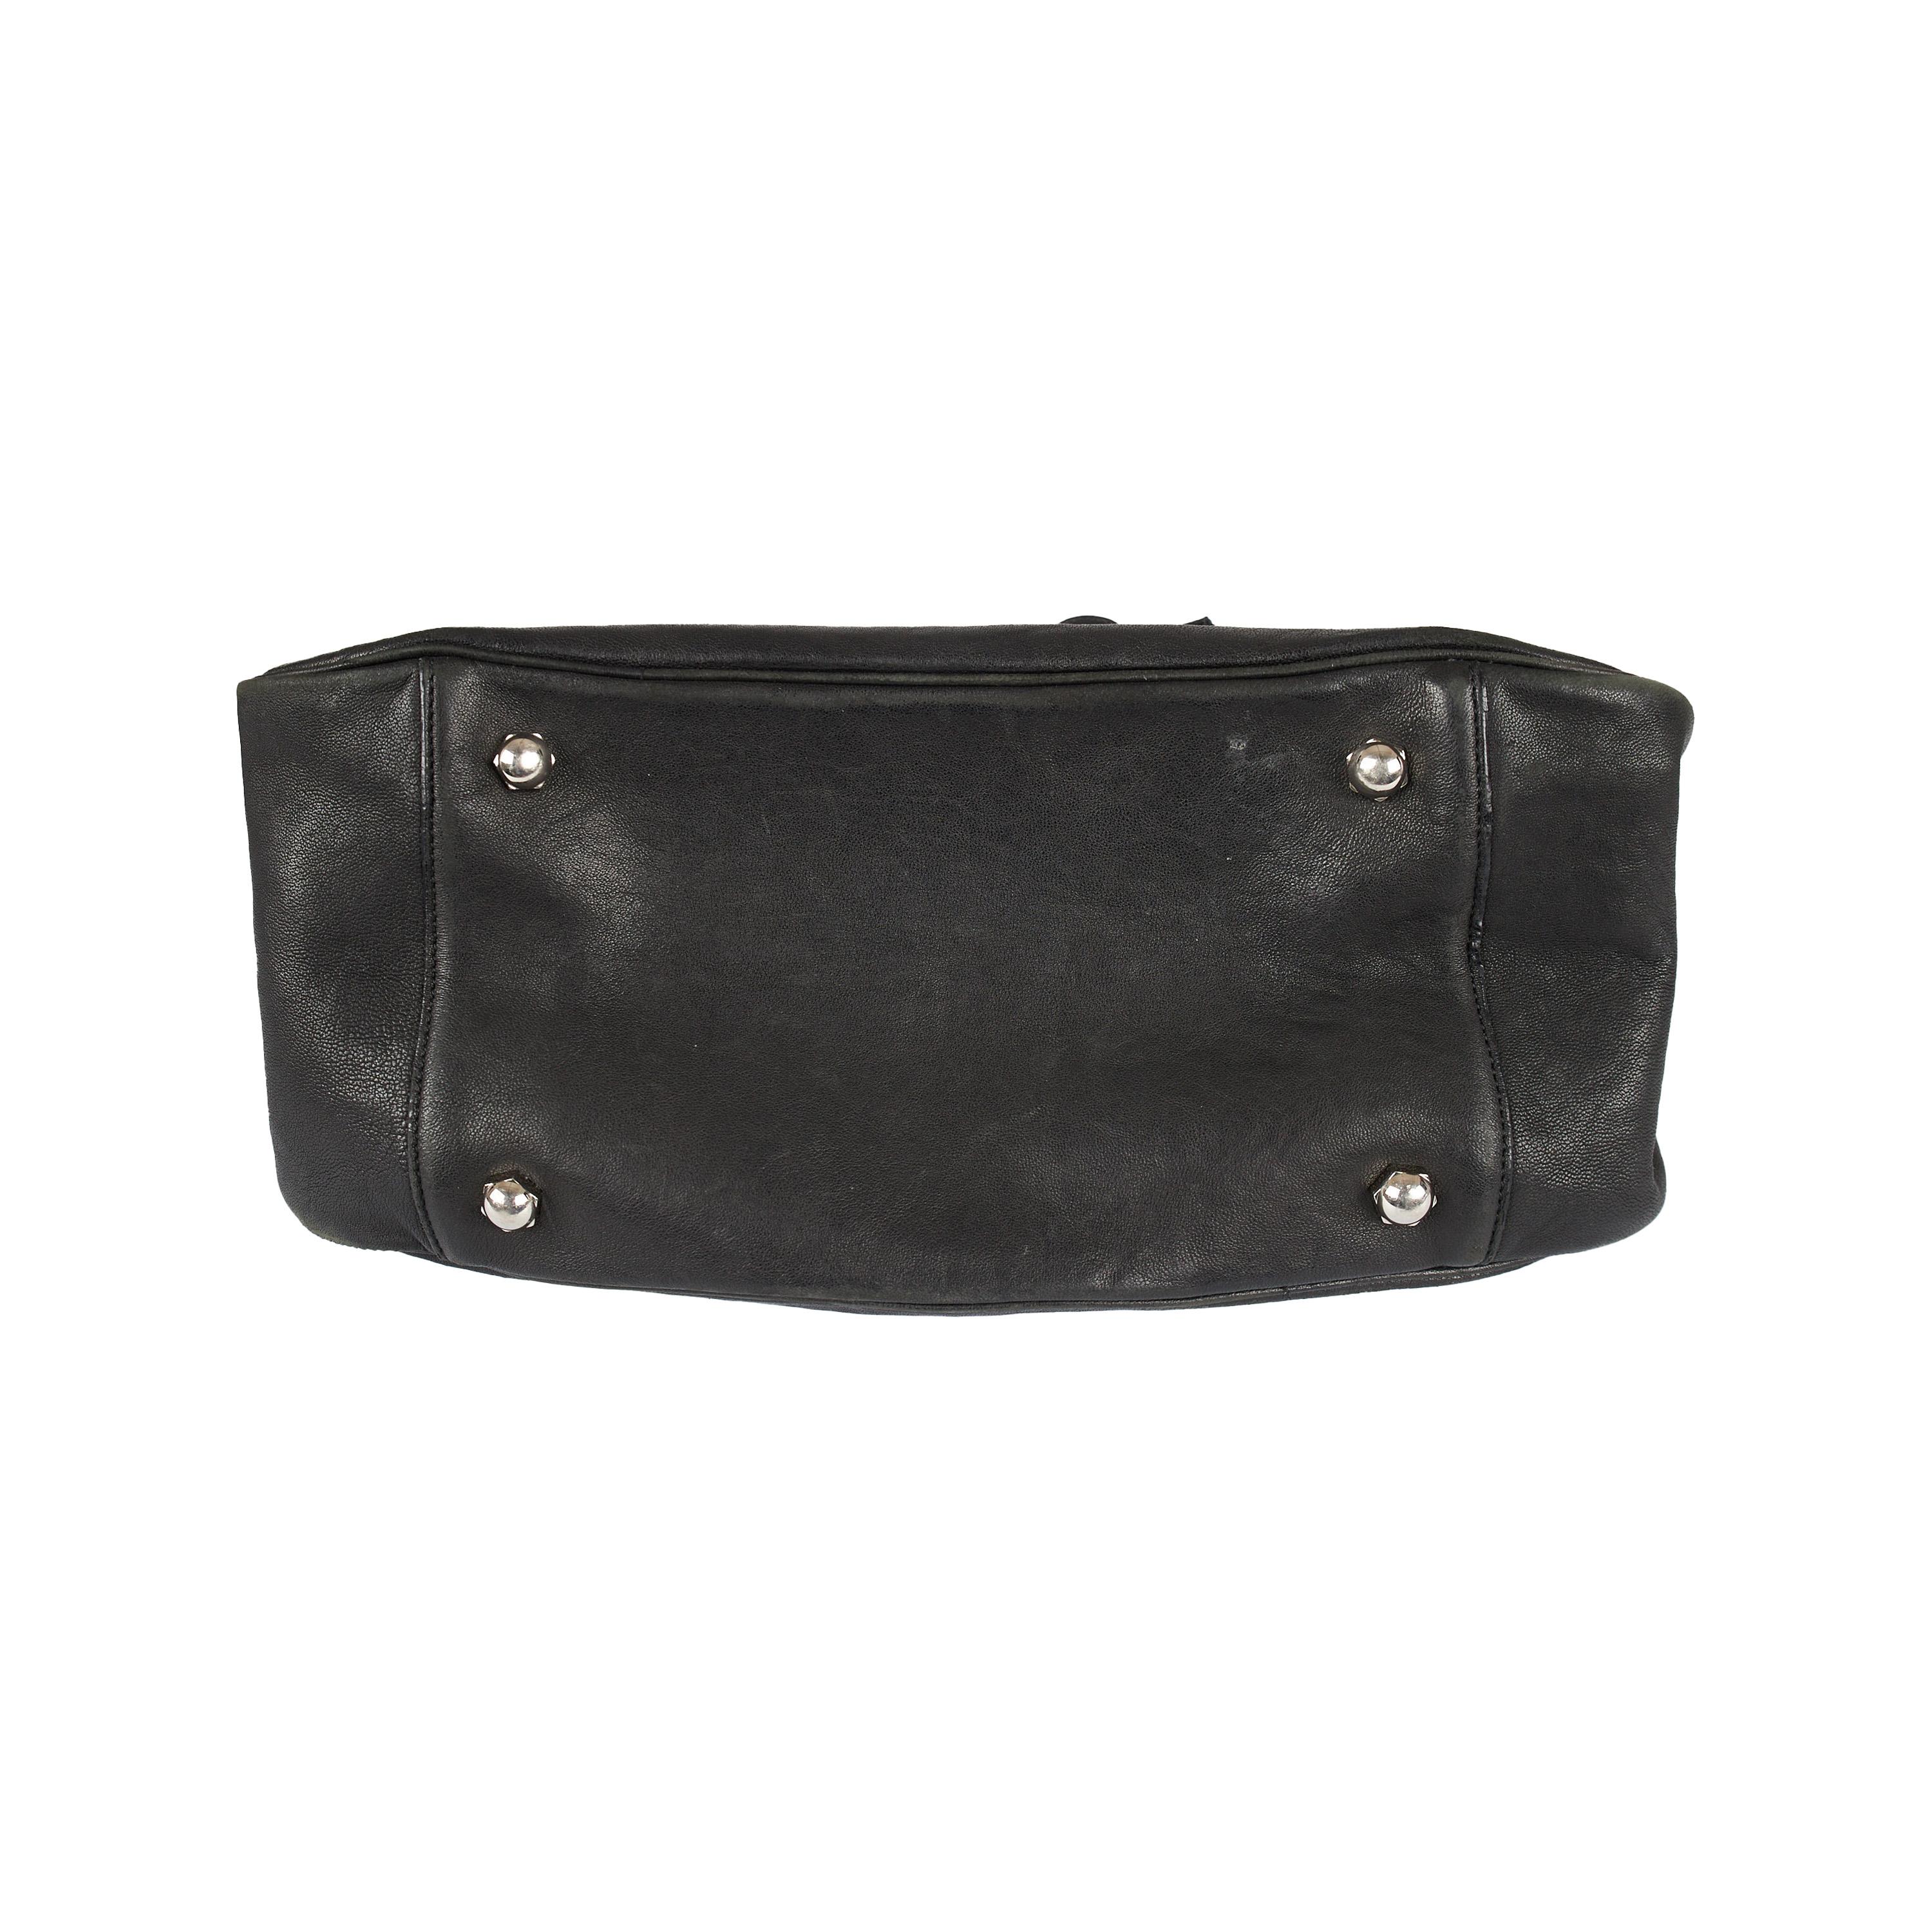 This Yves Saint Laurent Roady Hobo Bag, crafted in lambskin leather, is perfect for everyday use. It features a black leather with crystal rolled top handle and silver-tone hardware with embossed YSL logo detail. The interior offers one main